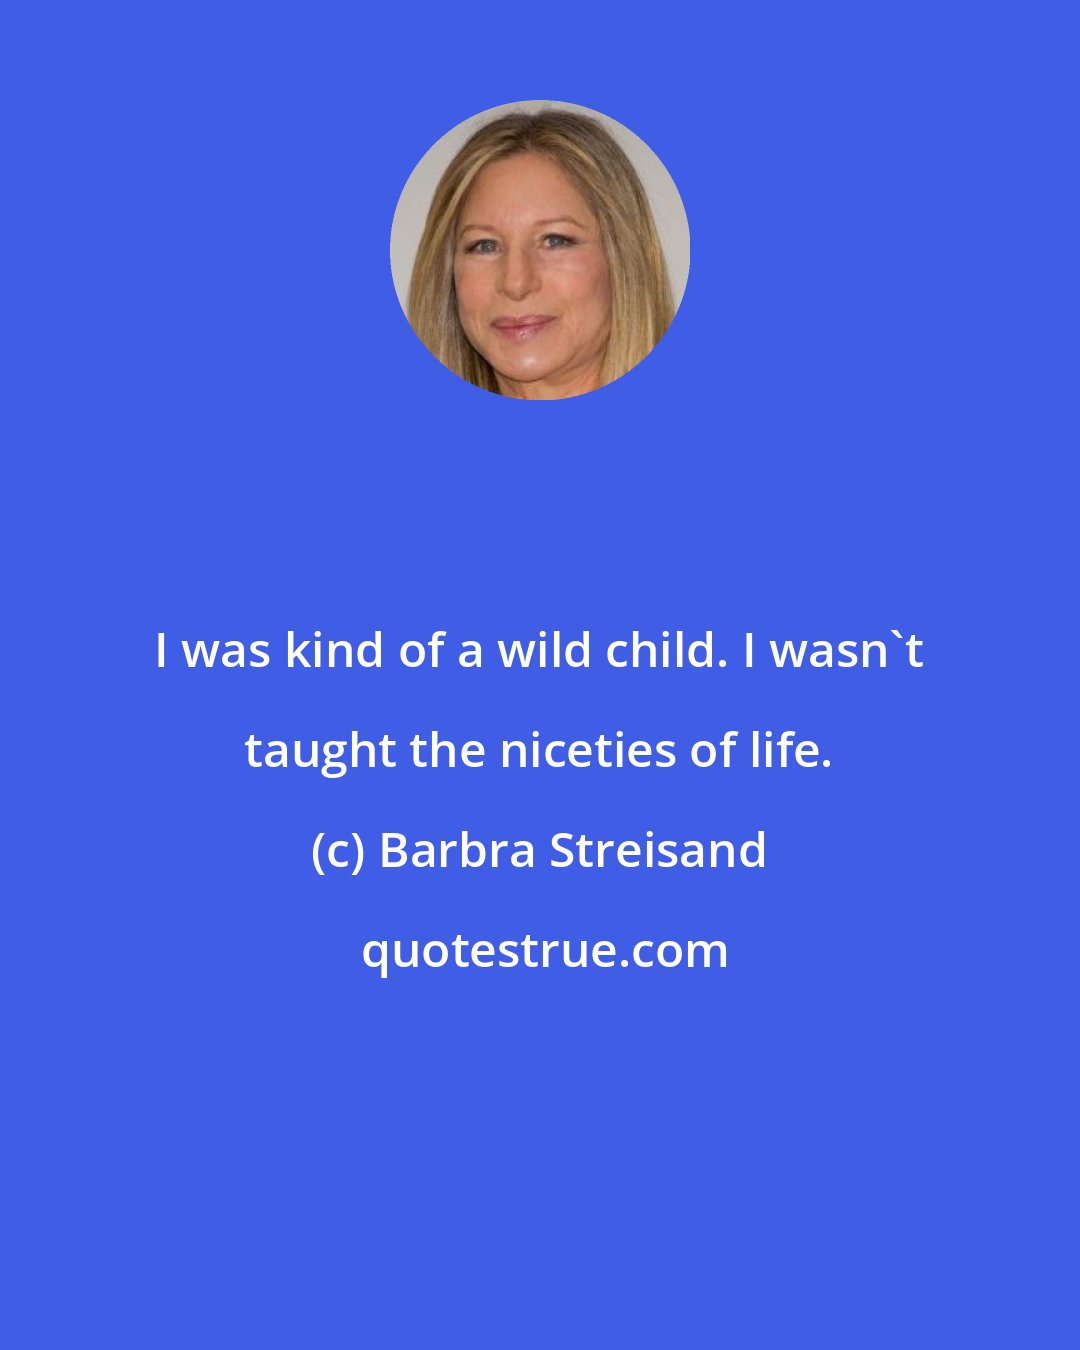 Barbra Streisand: I was kind of a wild child. I wasn't taught the niceties of life.